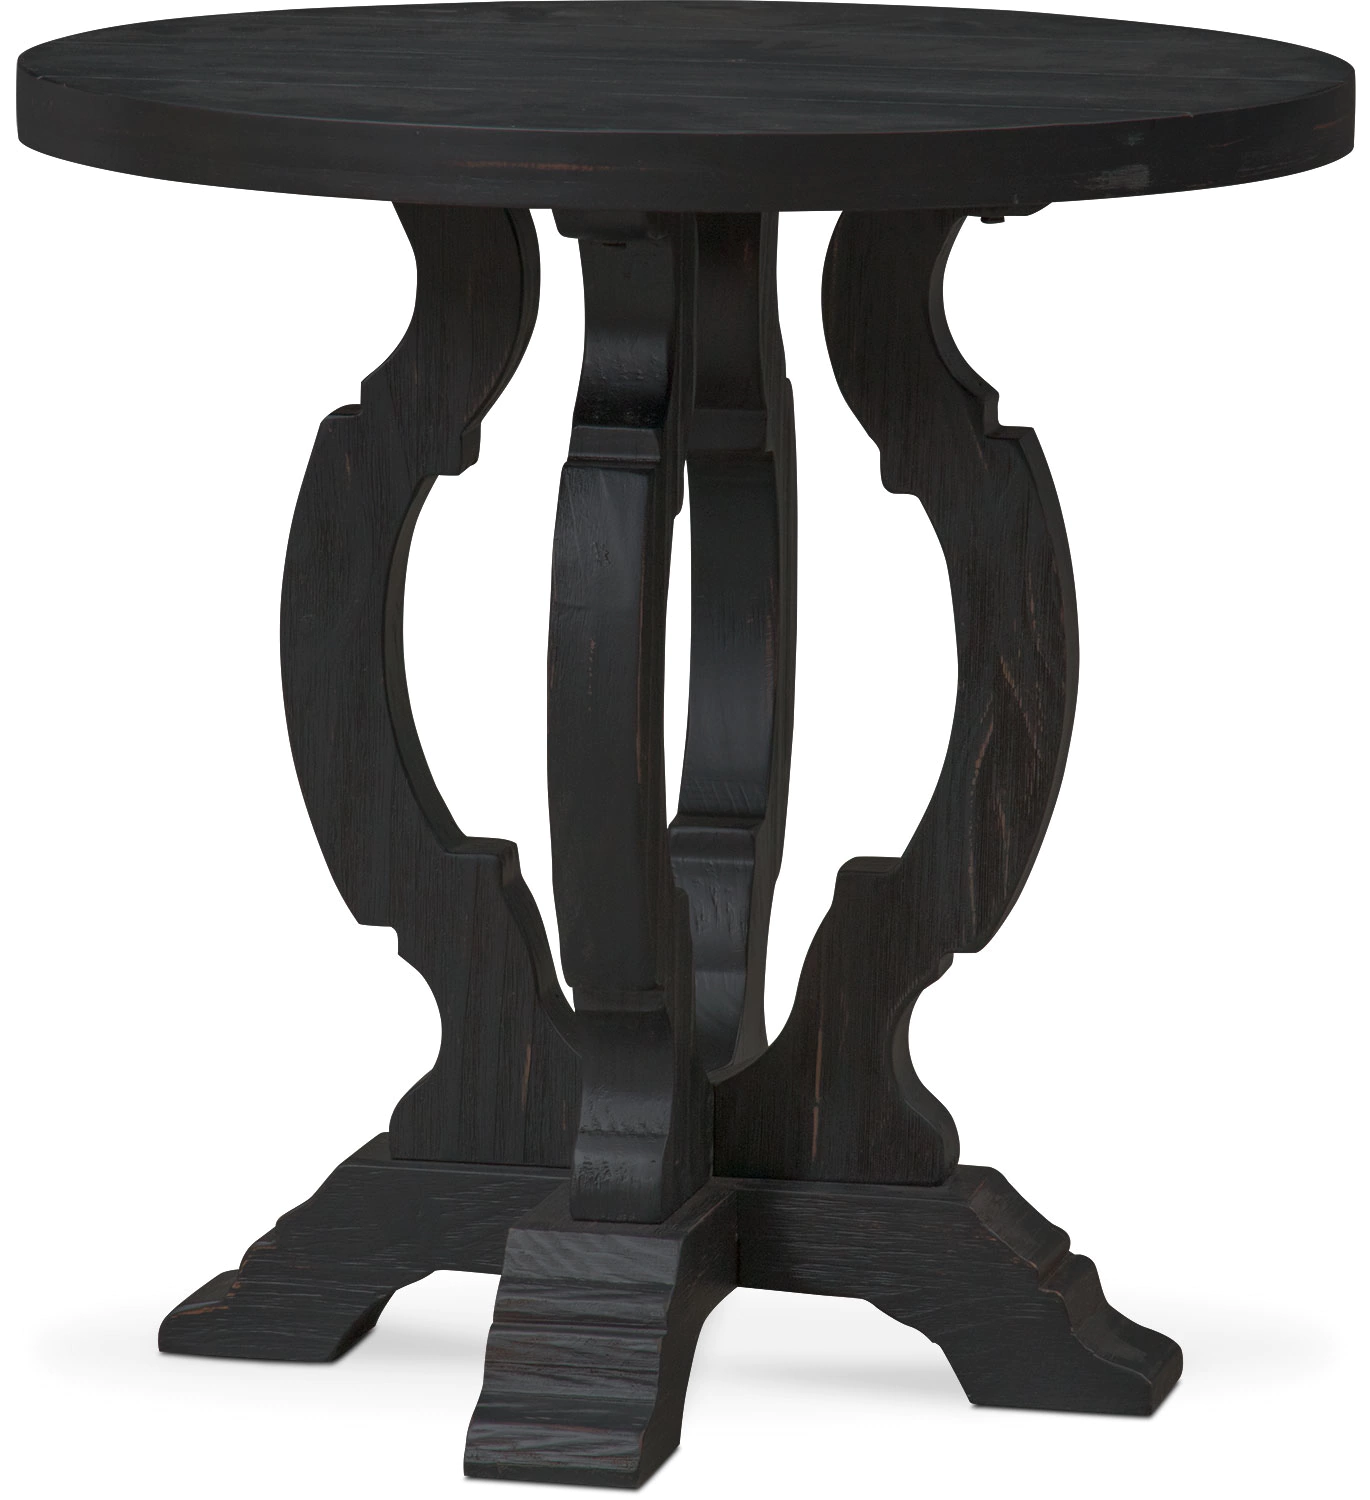 layne accent table black value city furniture and mattresses dining room outdoor drink lamp tables for living bathroom clock luxury triangular end wood copper top patio unique